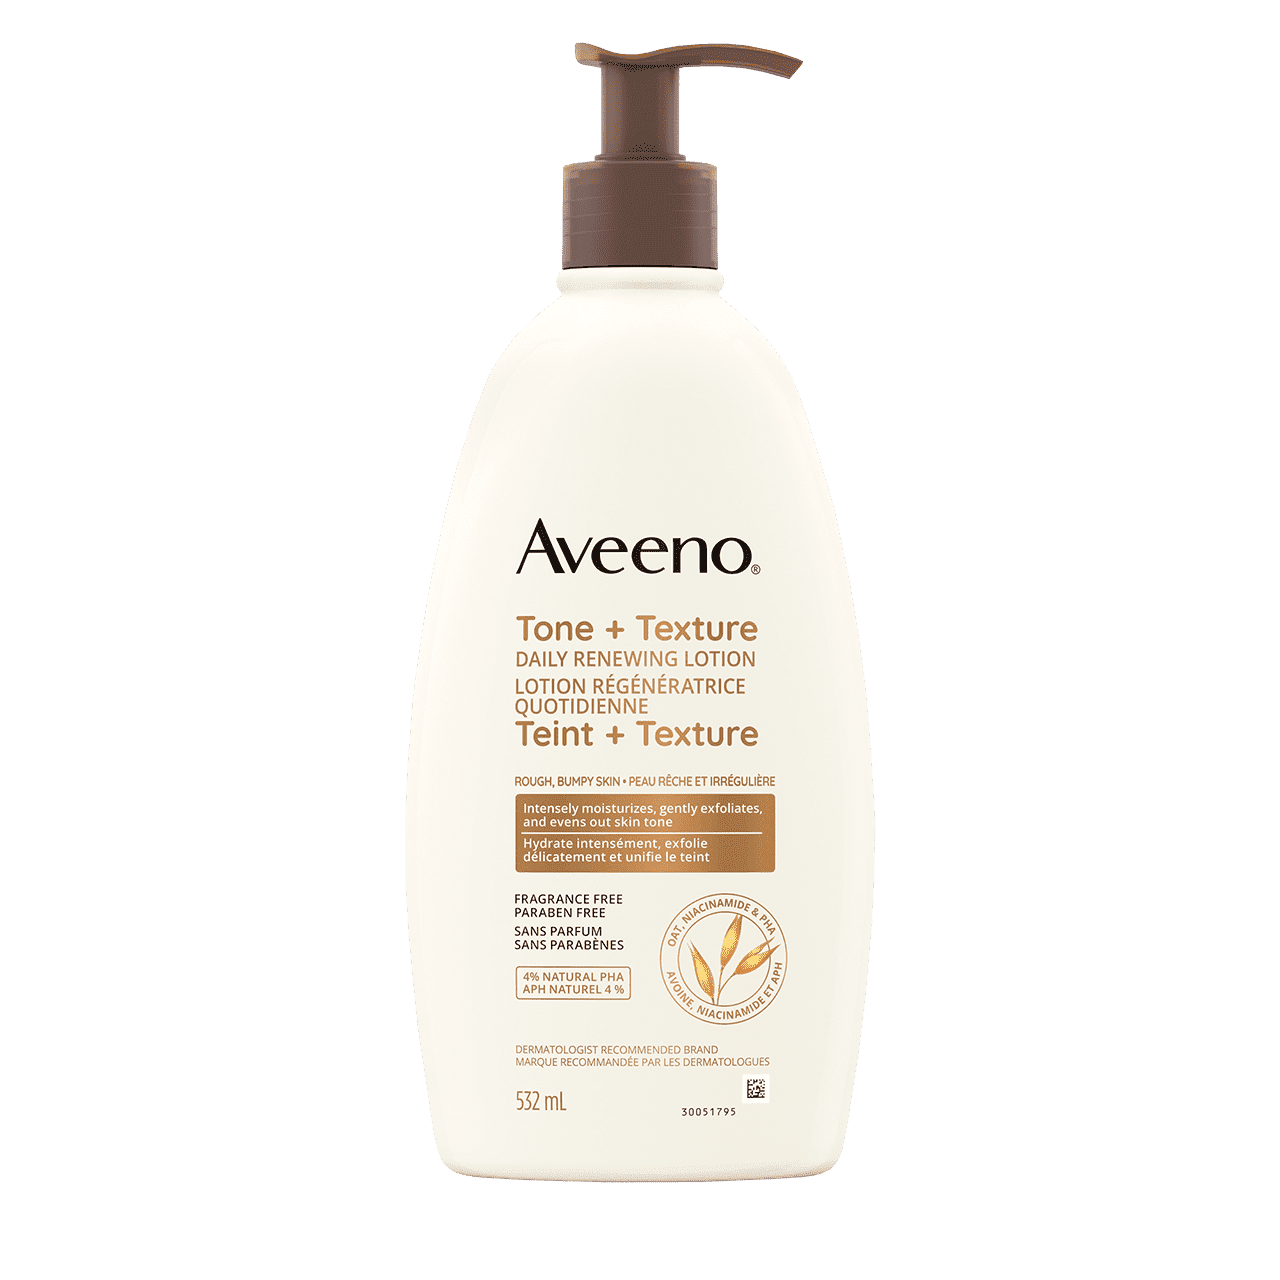 Bottle of Aveeno® Tone + Texture Daily Renewing Lotion in 532mL